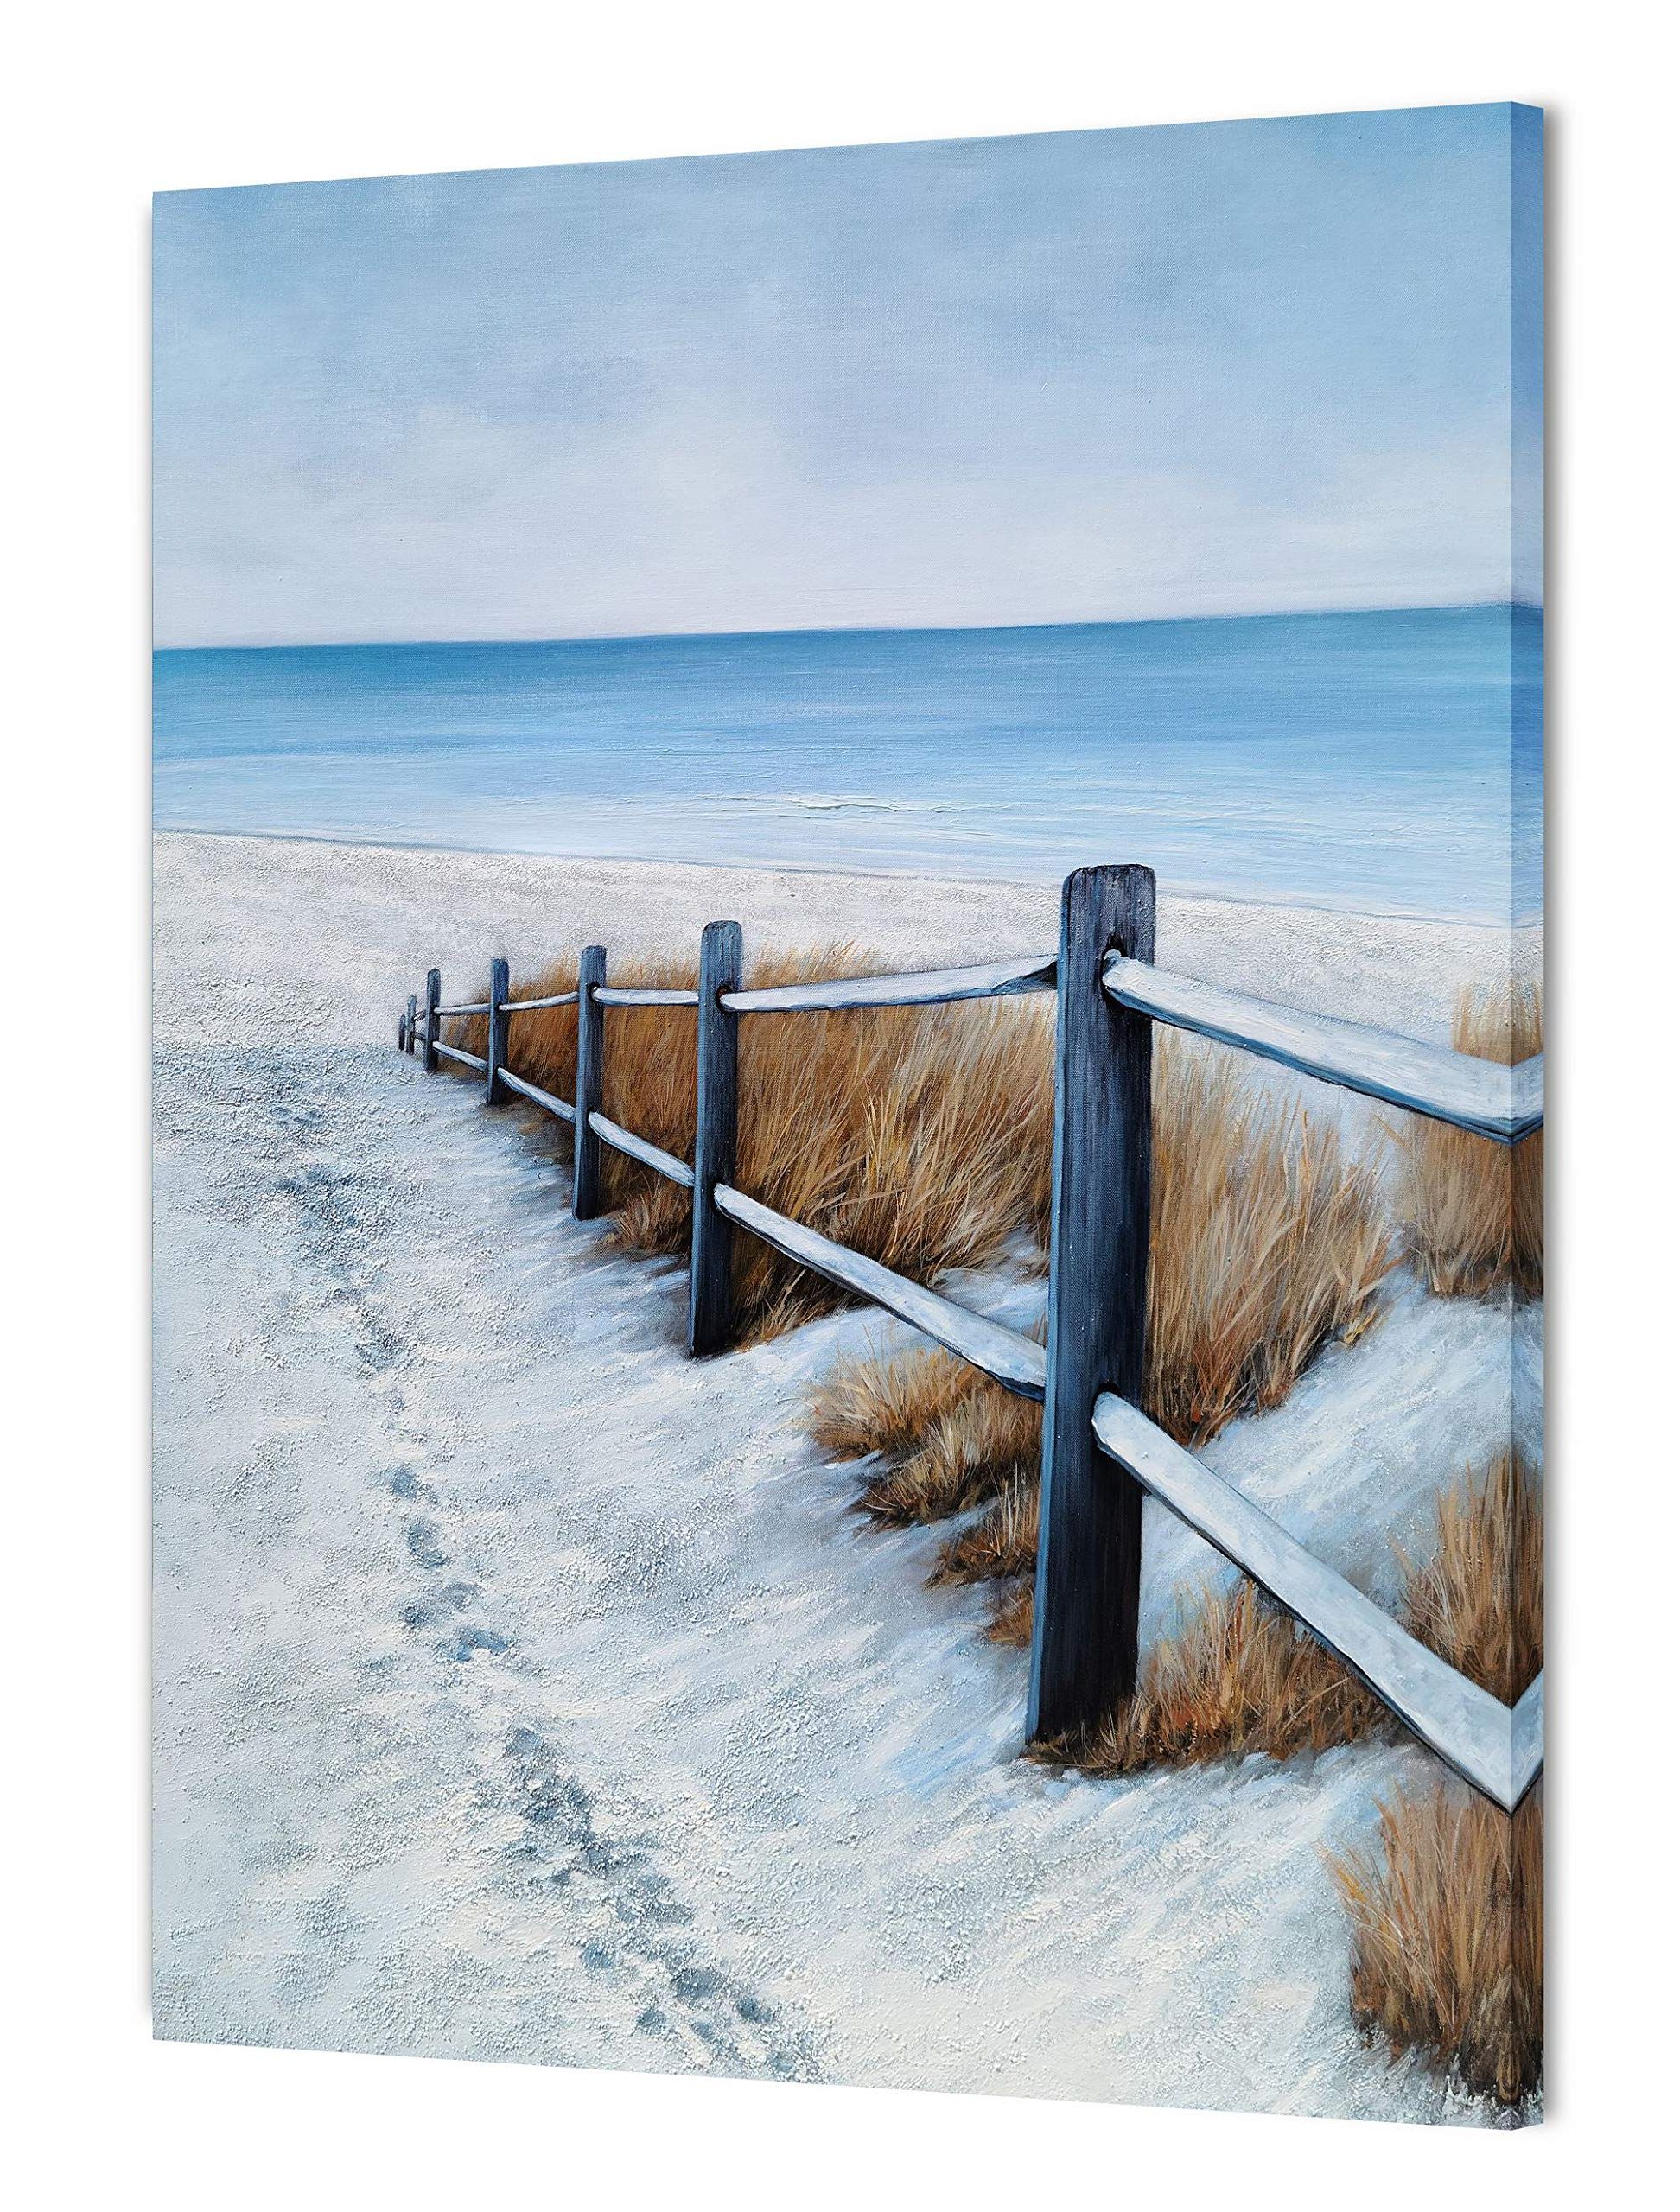 Most Recent Amazon: Yhsky Arts Beach Canvas Wall Art – Blue And White Painting With  Fence, Modern Abstract Coastal Pictures For Living Room Bedroom Bathroom  Decor: Posters & Prints In Bathroom Bedroom Fence Wall Art (Photo 2 of 15)